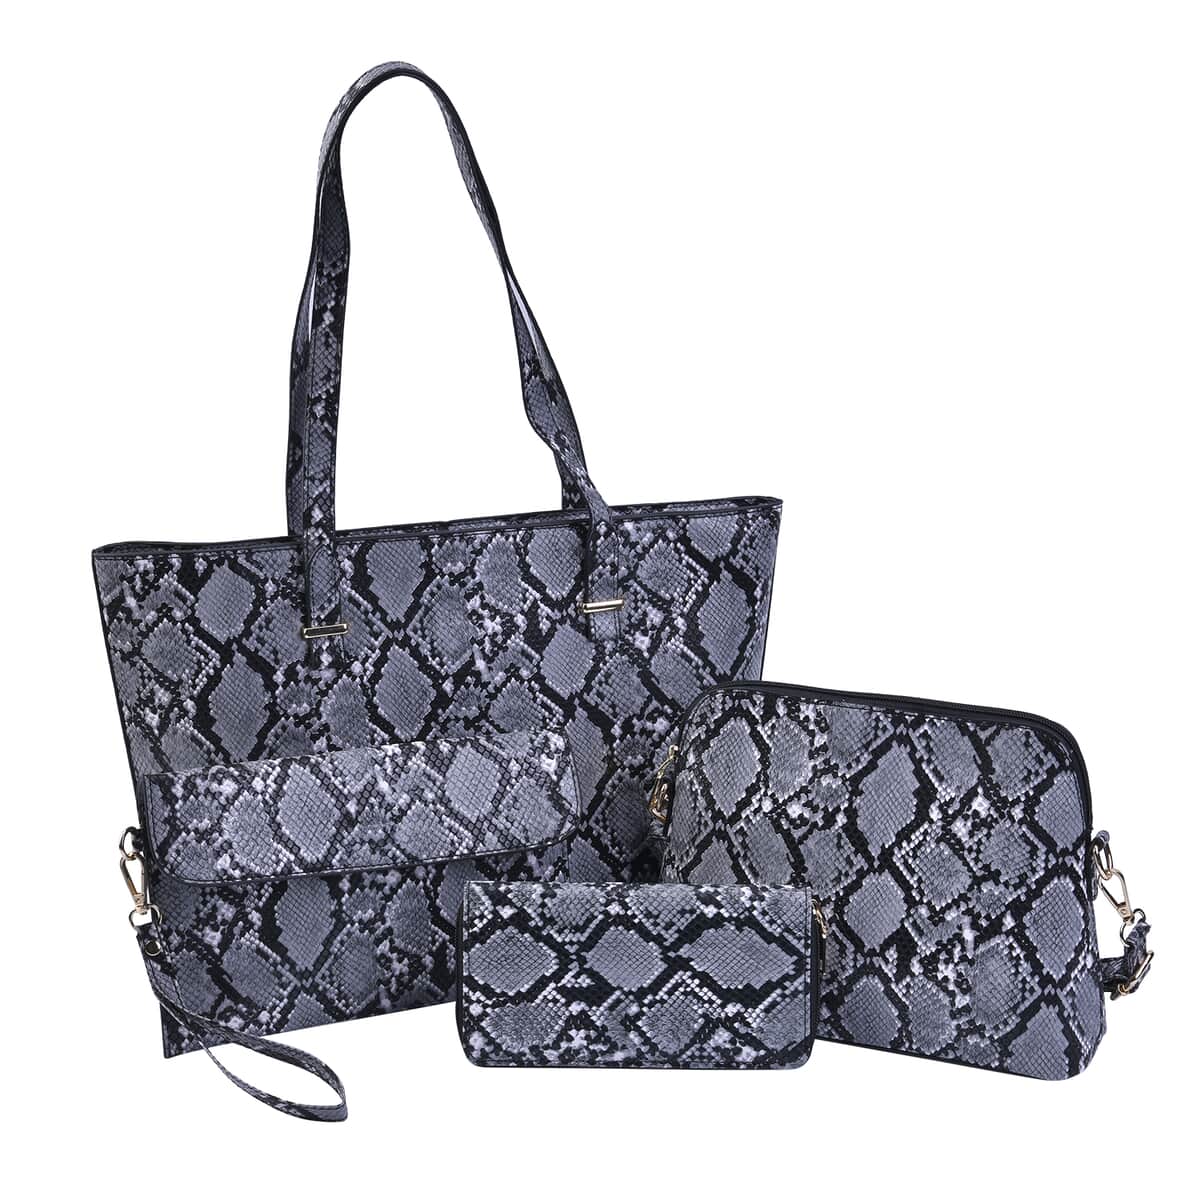 PASSAGE Black Snake Skin Pattern Faux Leather Totebag (13"x4"x10.5"), Crossbody Bag (10.24"x3.15"x7.5"), Clutch Bag (9.84"x6.3") and Wallet (7.87"x4") image number 0